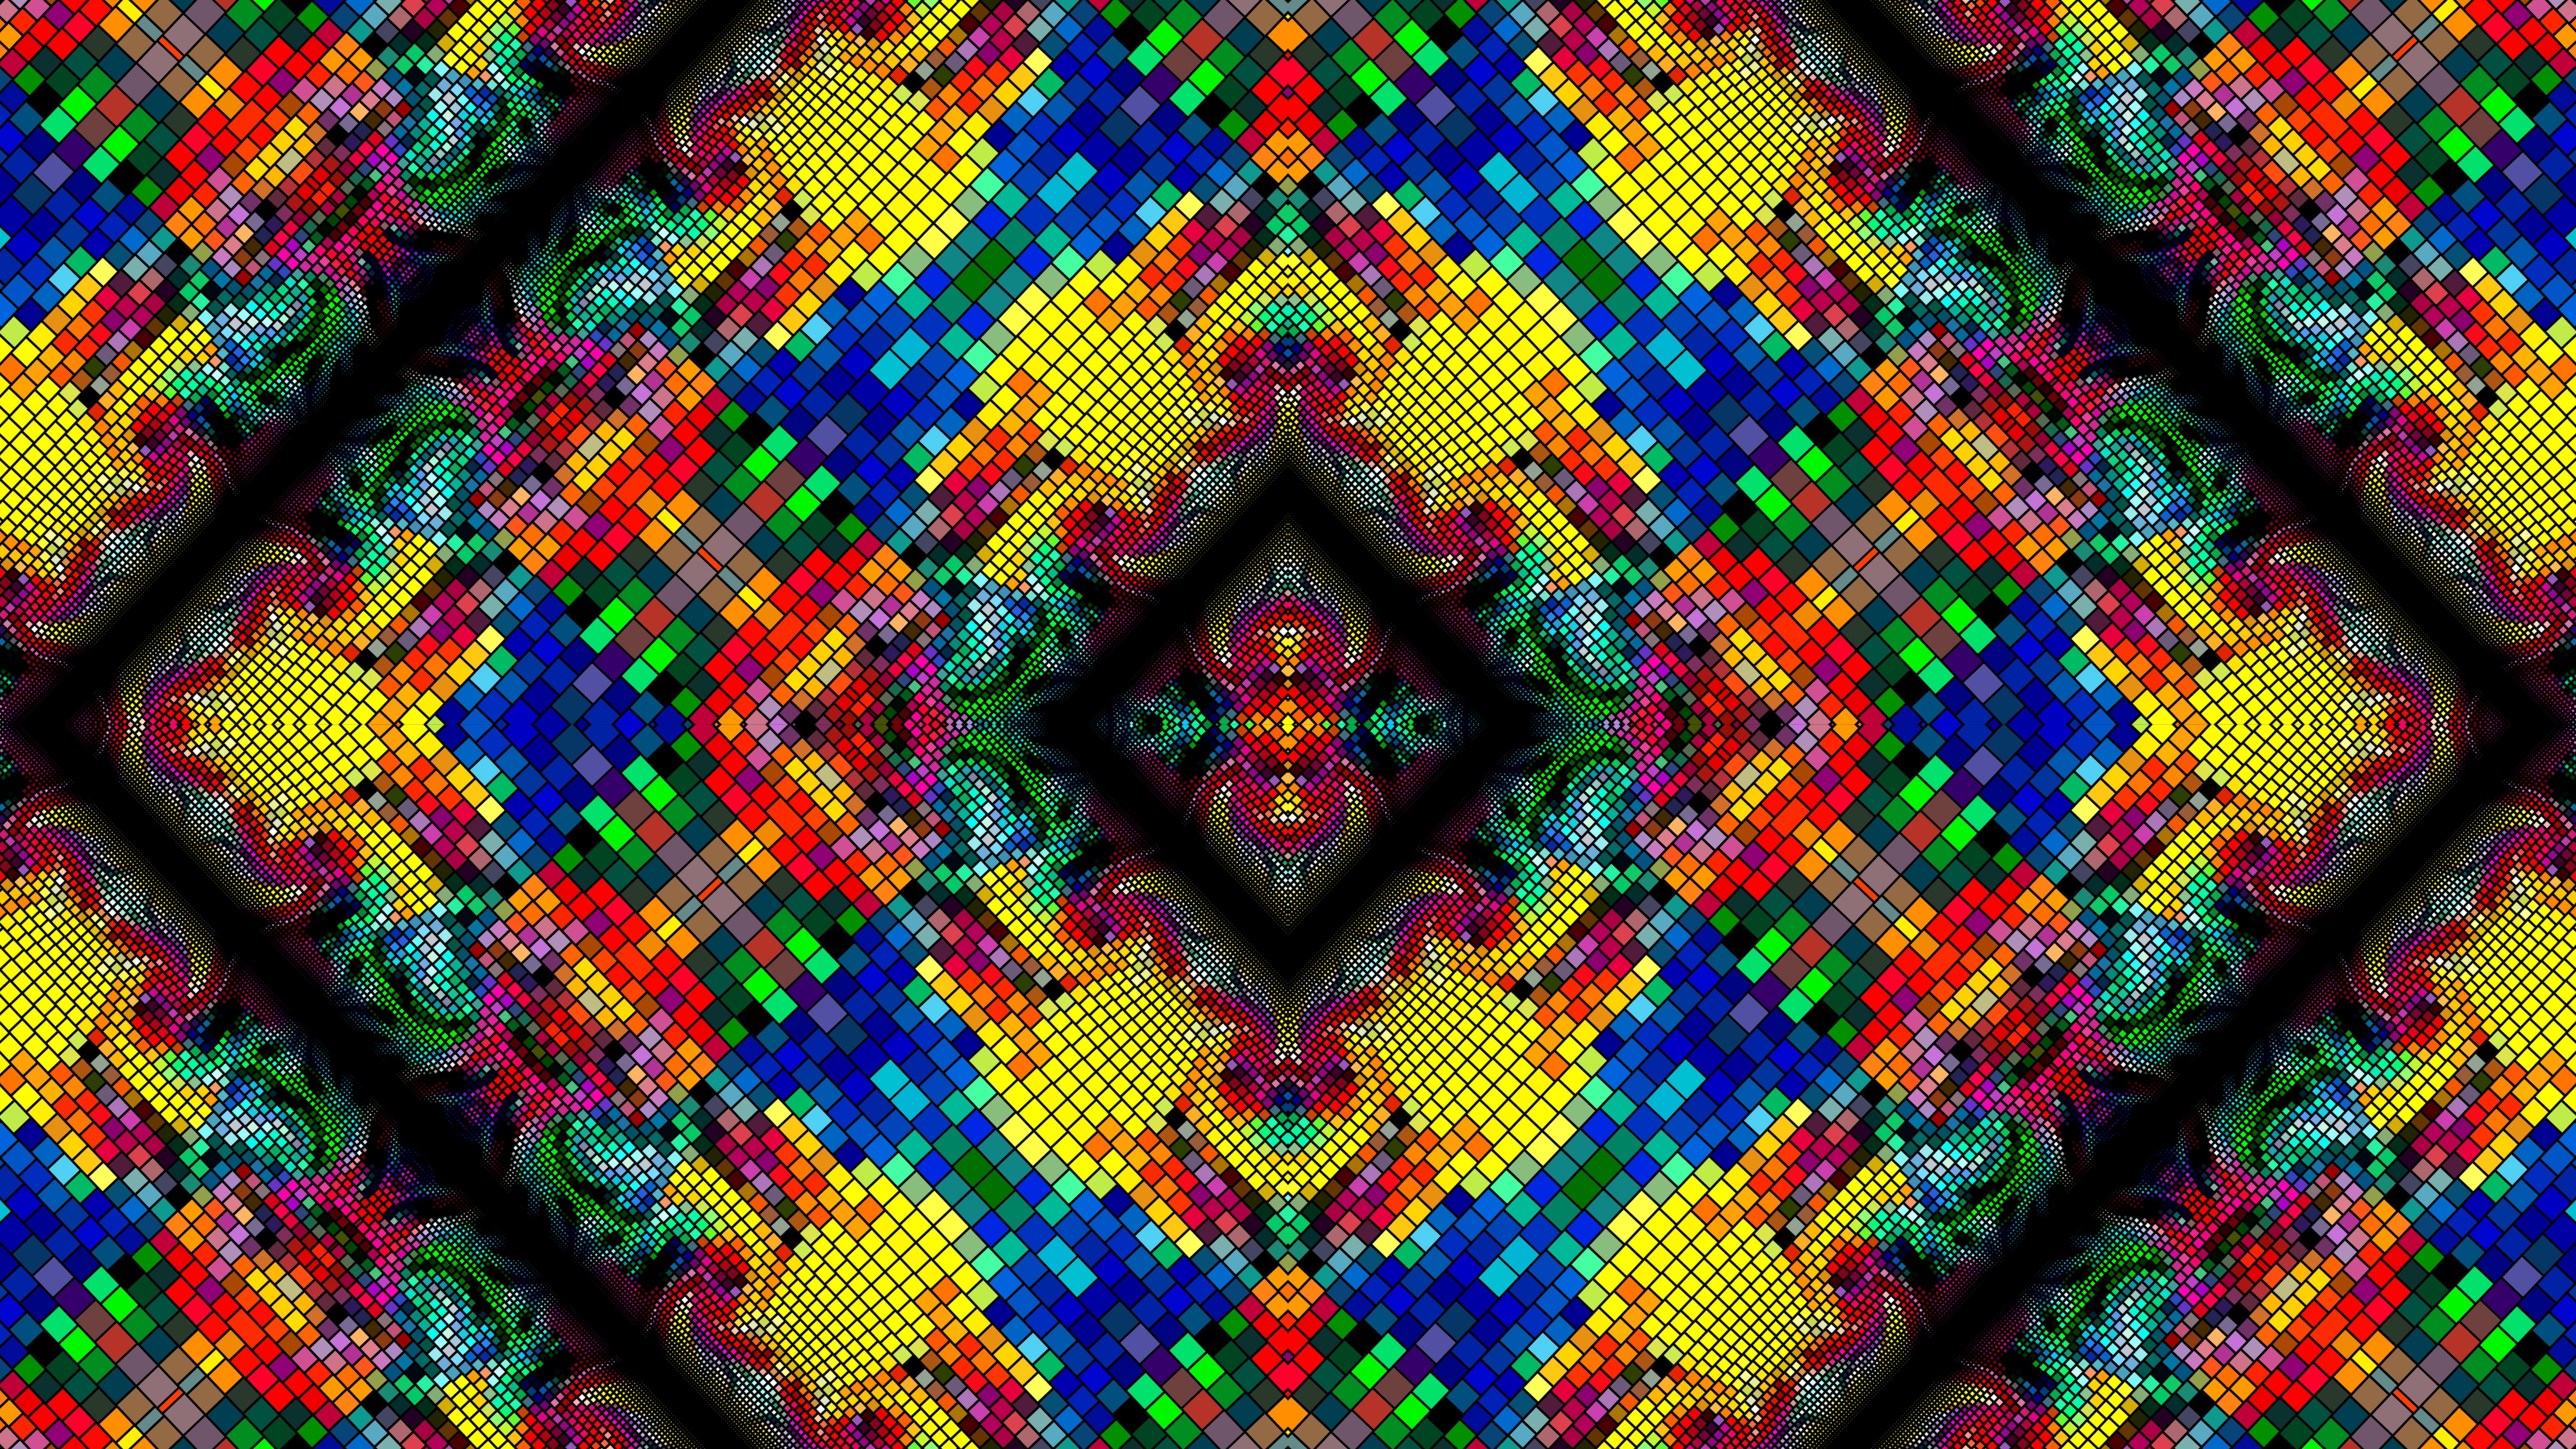 Artistic Colorful Colors Kaleidoscope Mosaic Pattern Physcedelic 6000x3375